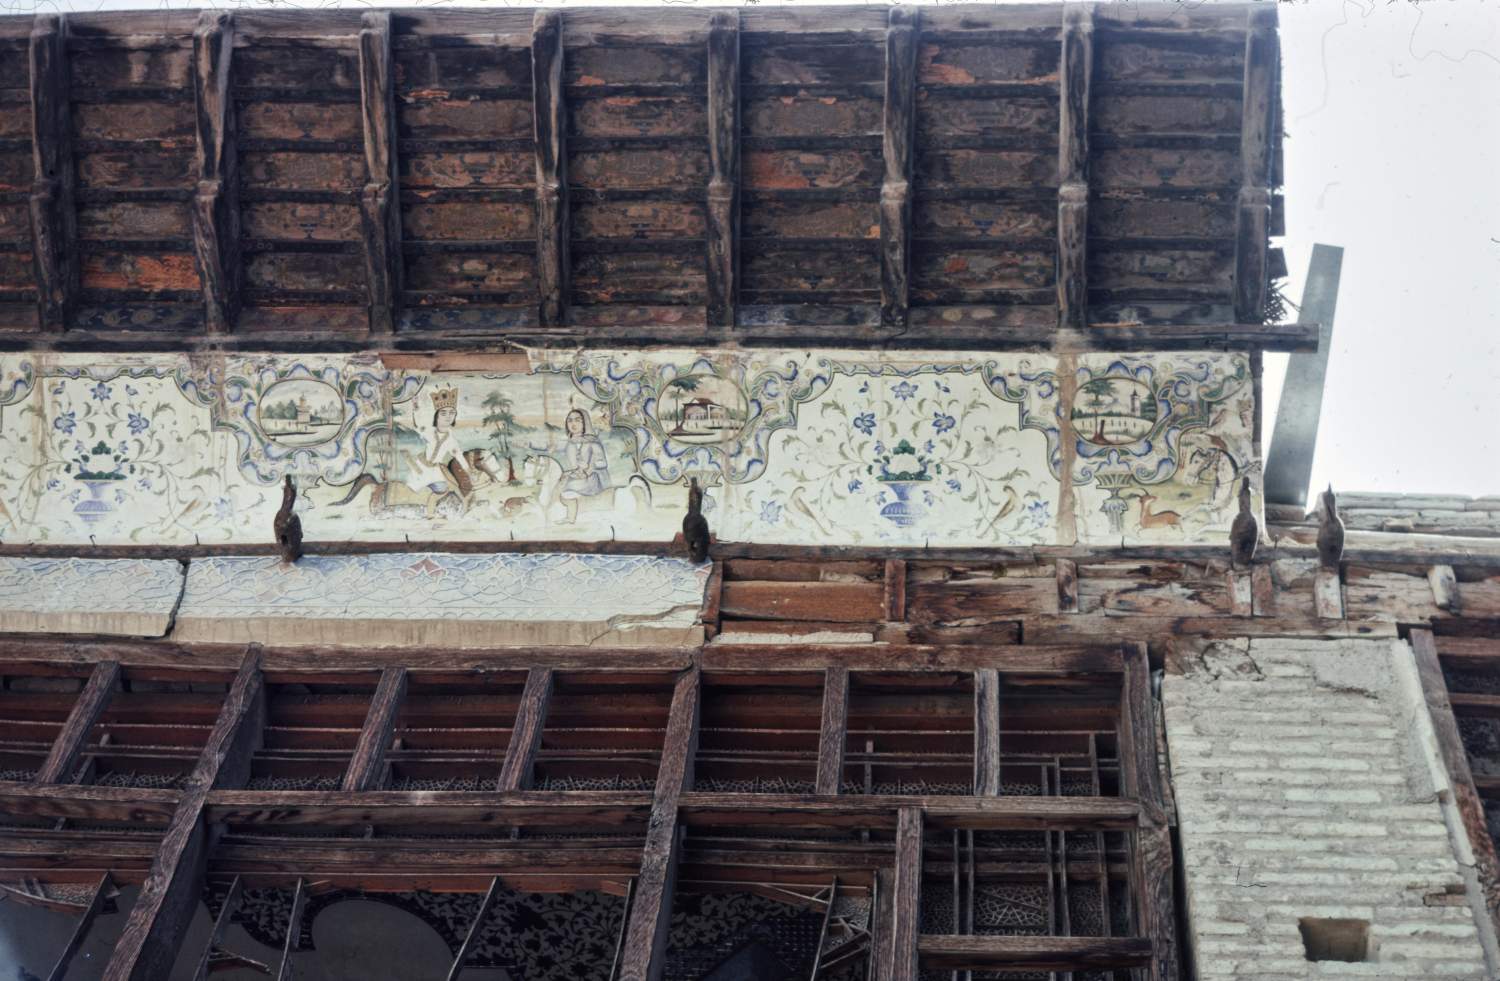 View of wooden awning over windows overlooking courtyard, including painted plaster decorations.